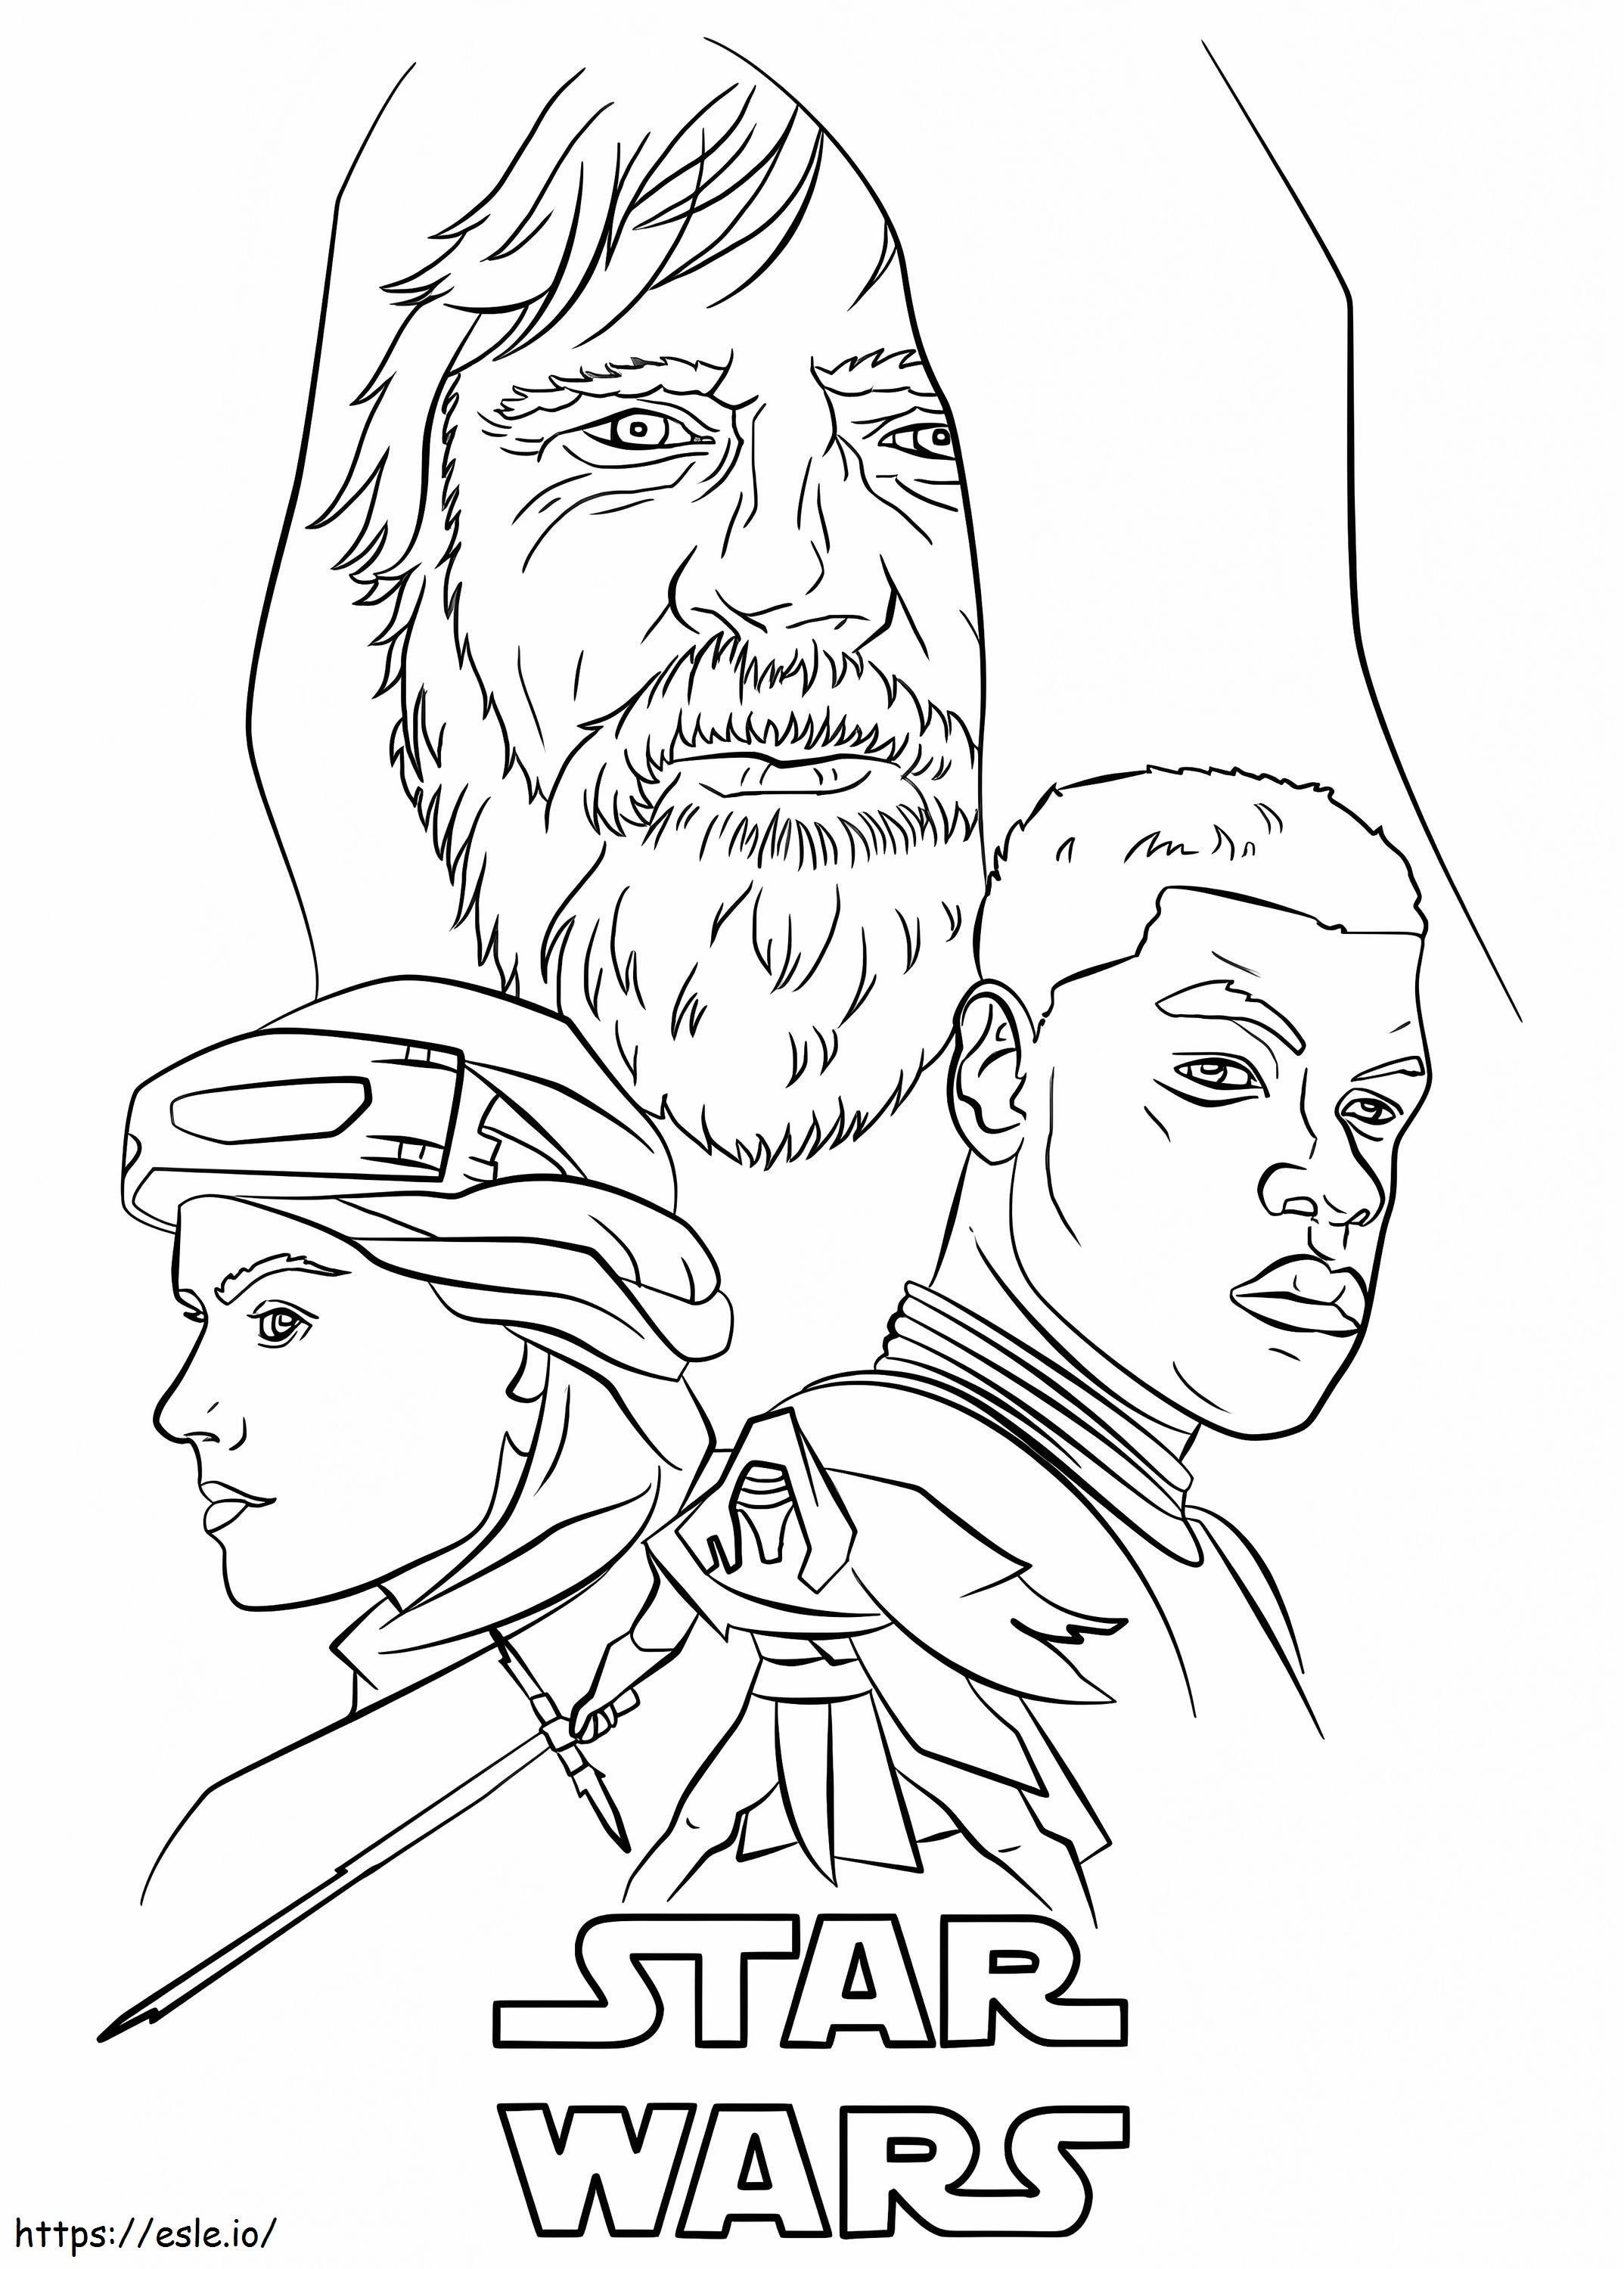 Star Wars The Force Awakens 733X1024 coloring page